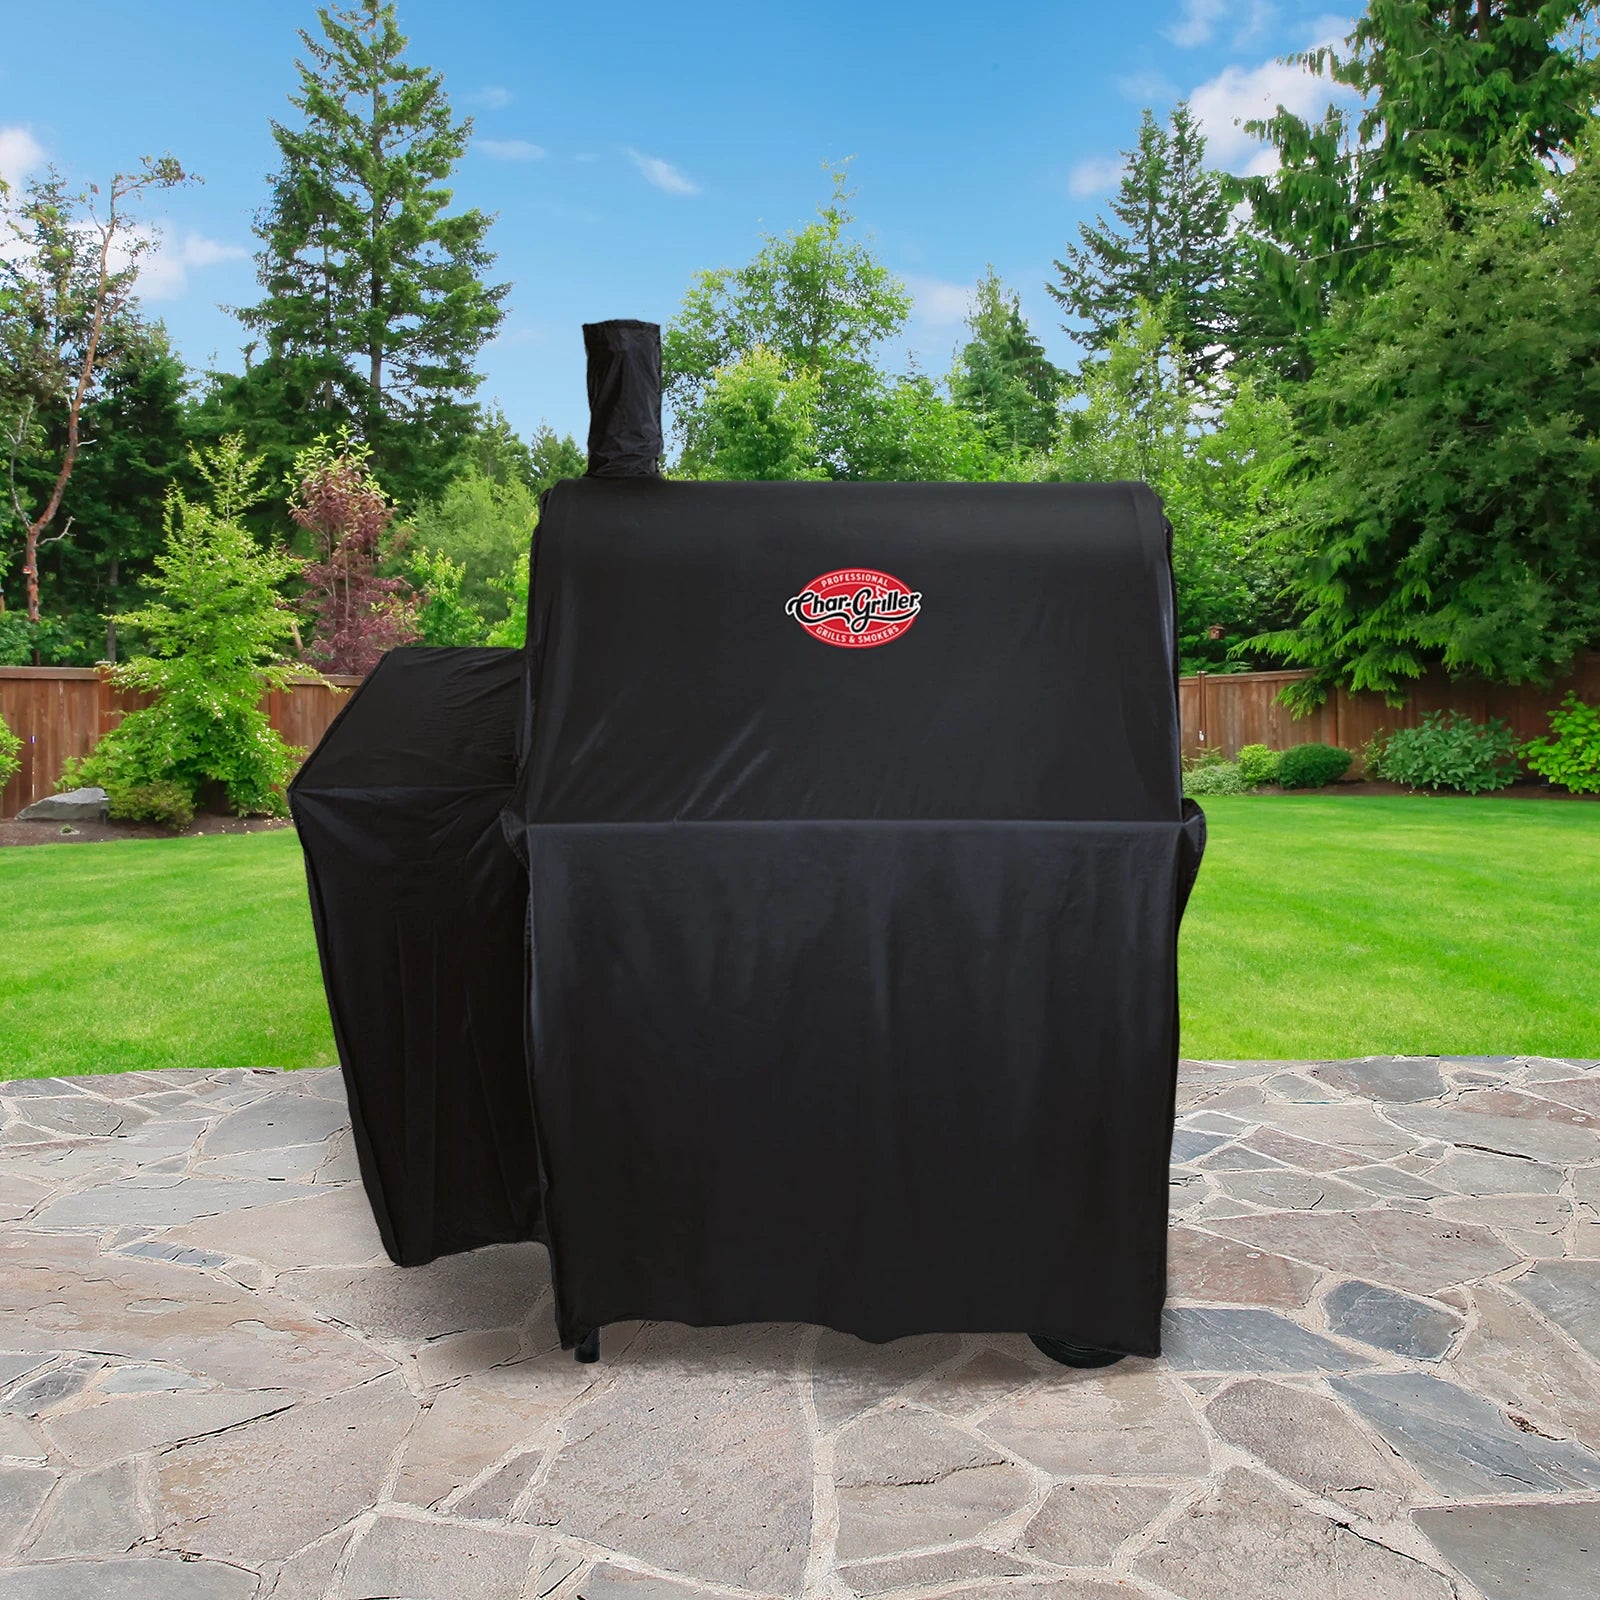 Covered Pro Deluxe grill without side fire box sitting on an outdoor patio